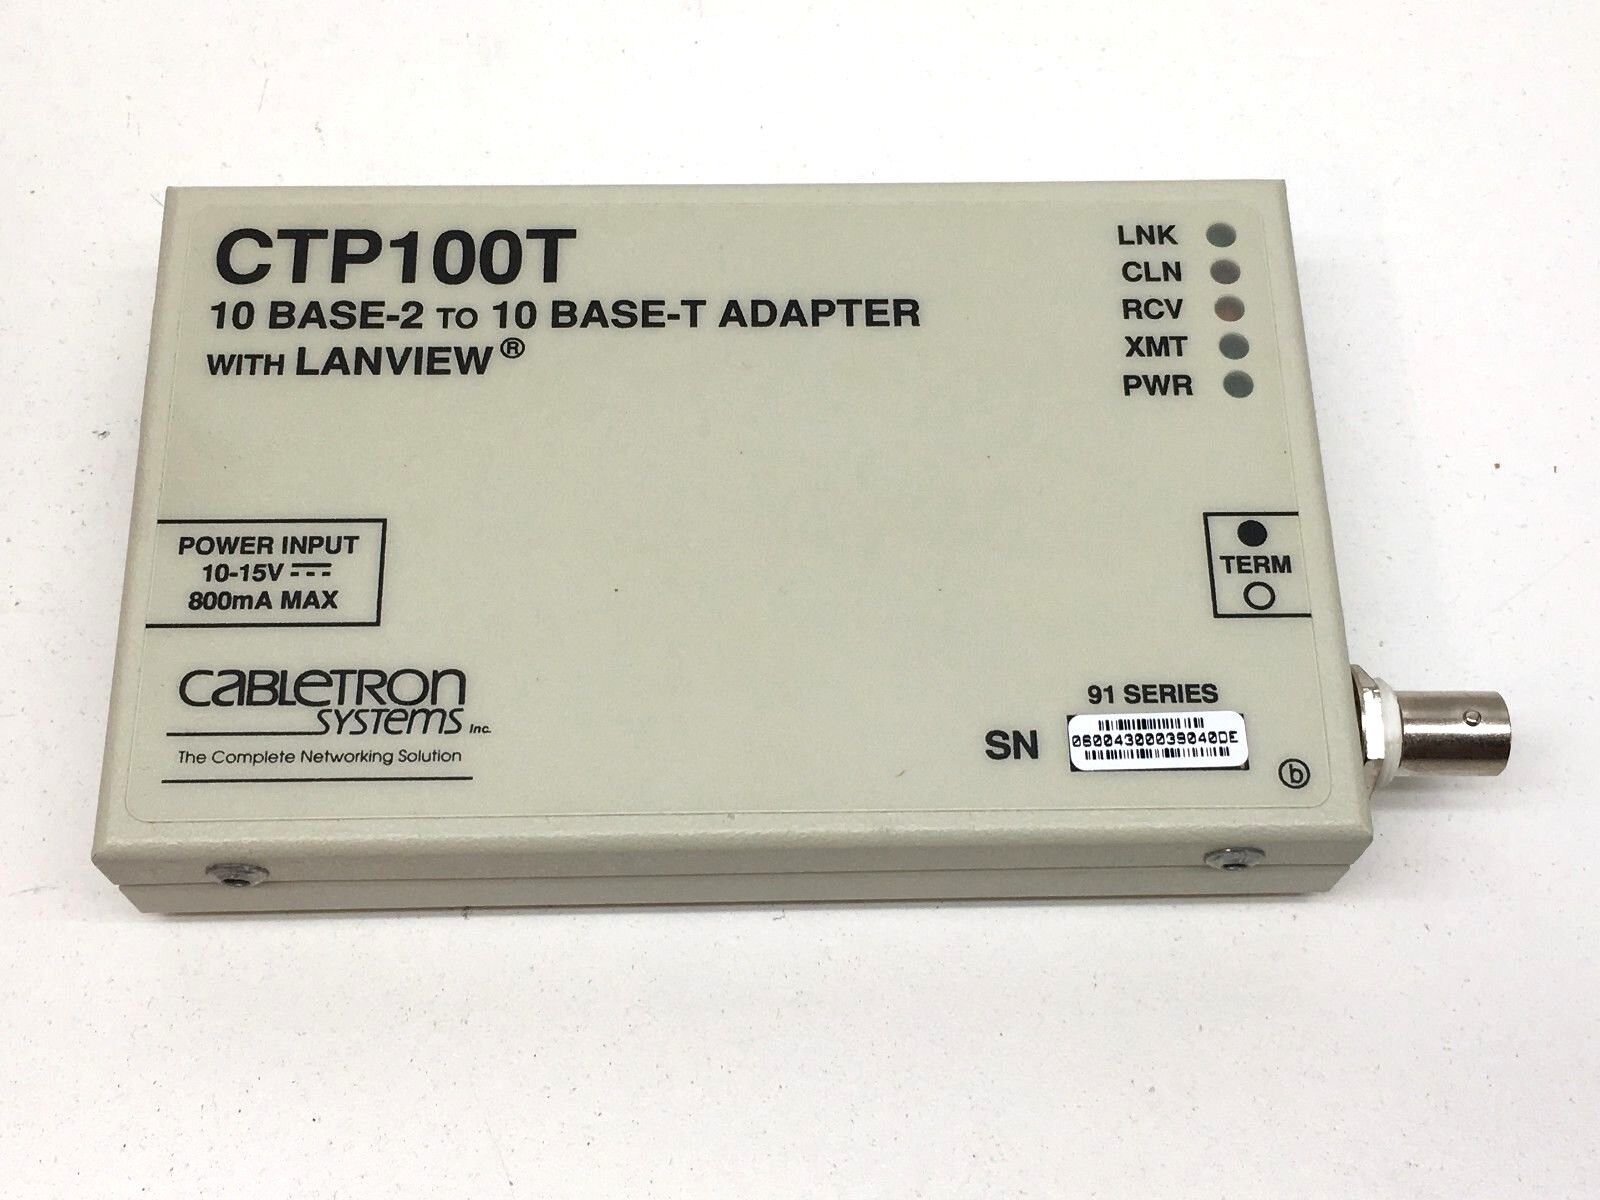 Cabletron Systems CTP100T 10BASE-2 to 10BASE-T Adapter with LANVIEW